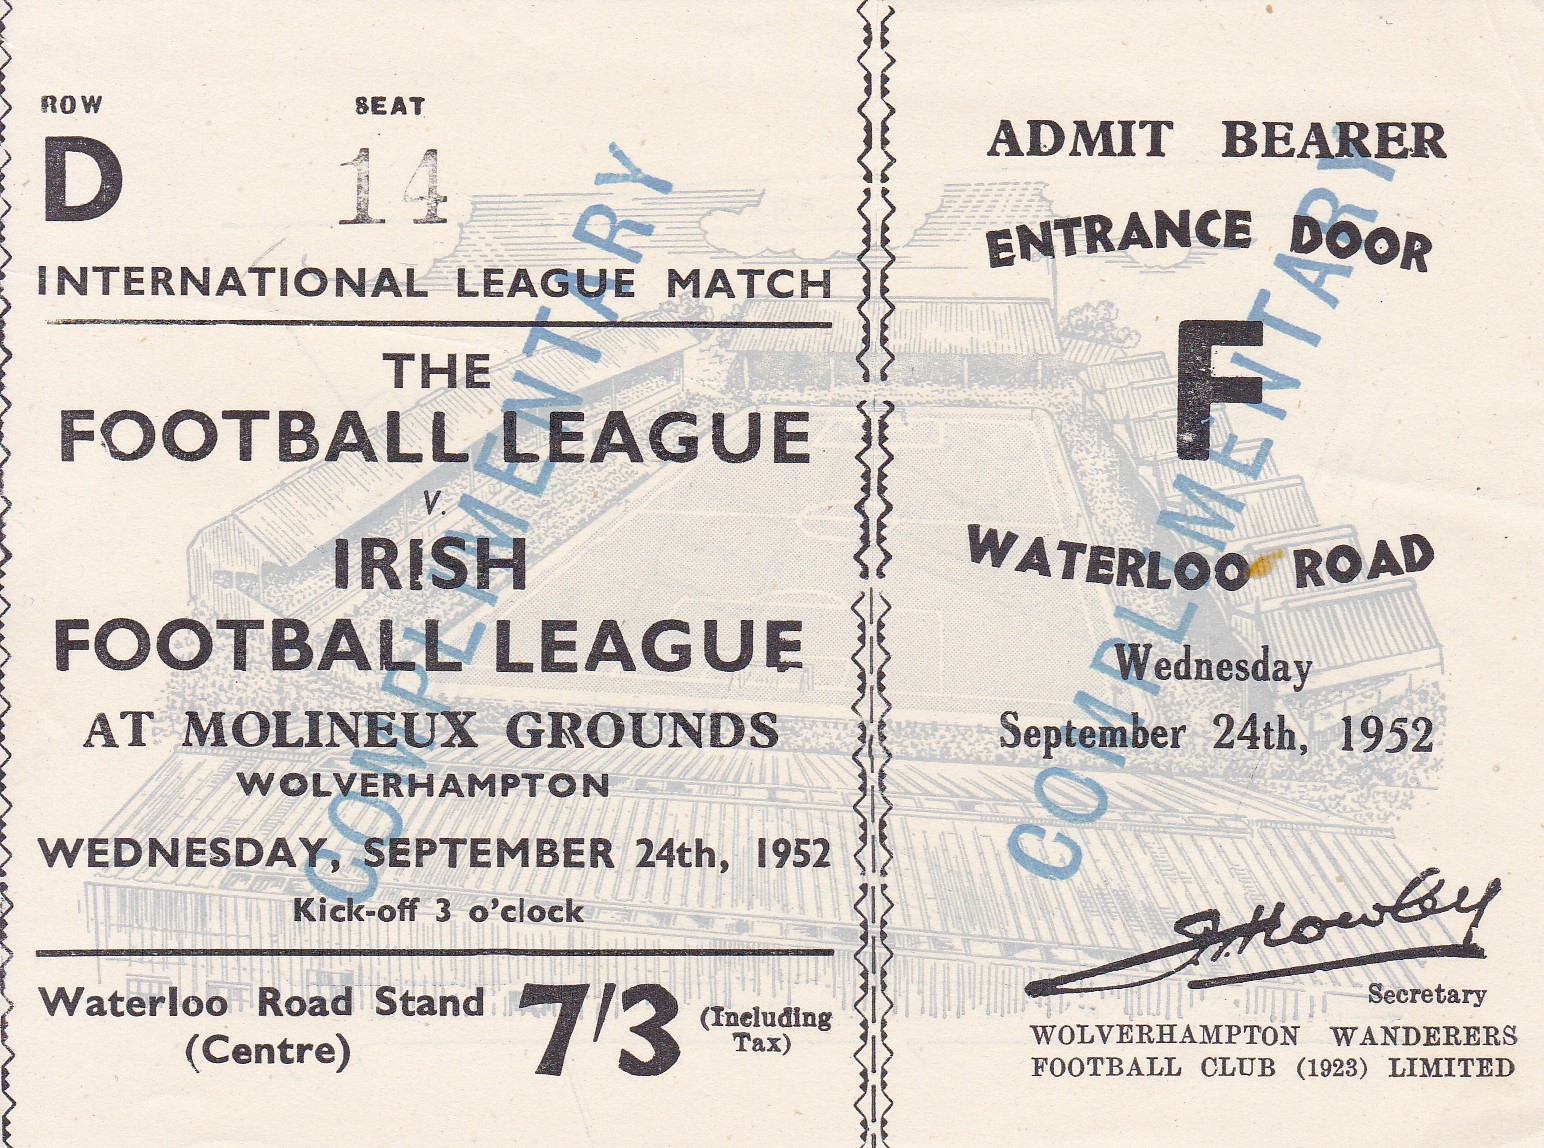 TICKET-1952 - WOLVES Ticket complete with counterfoil, Football League v Irish League, 24/9/52 at